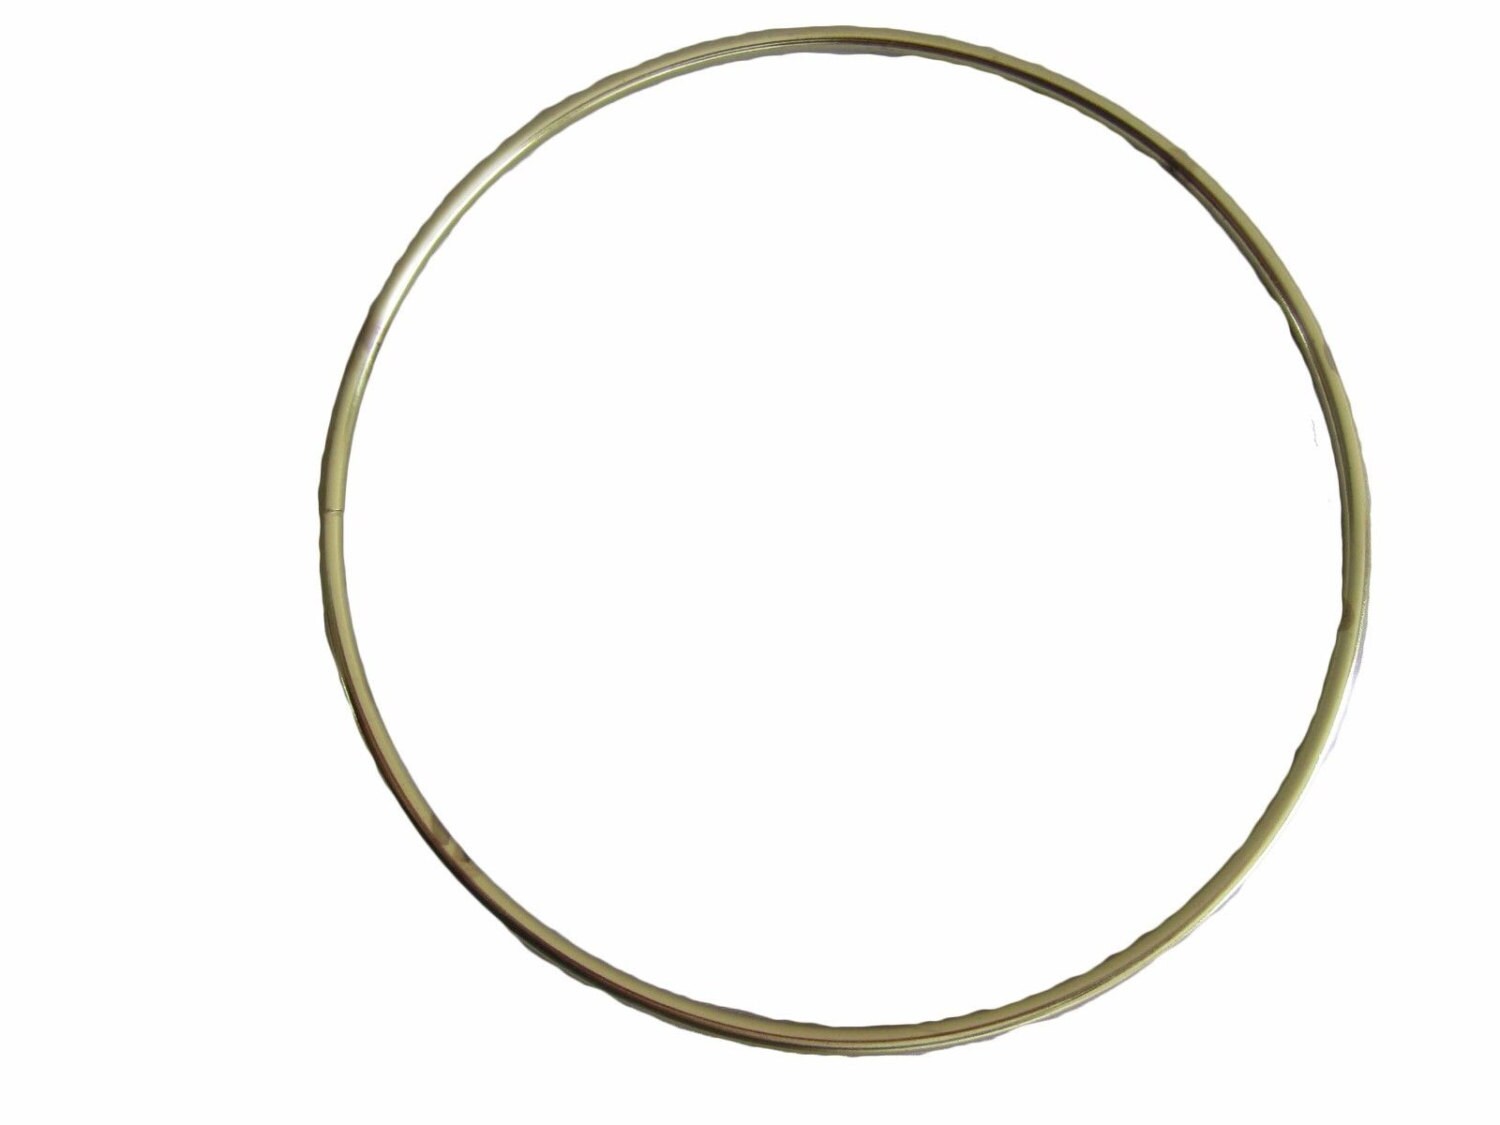 3 Inch Metal Rings, 3 Craft Rings, Qty of 4, Soldered Metal Craft